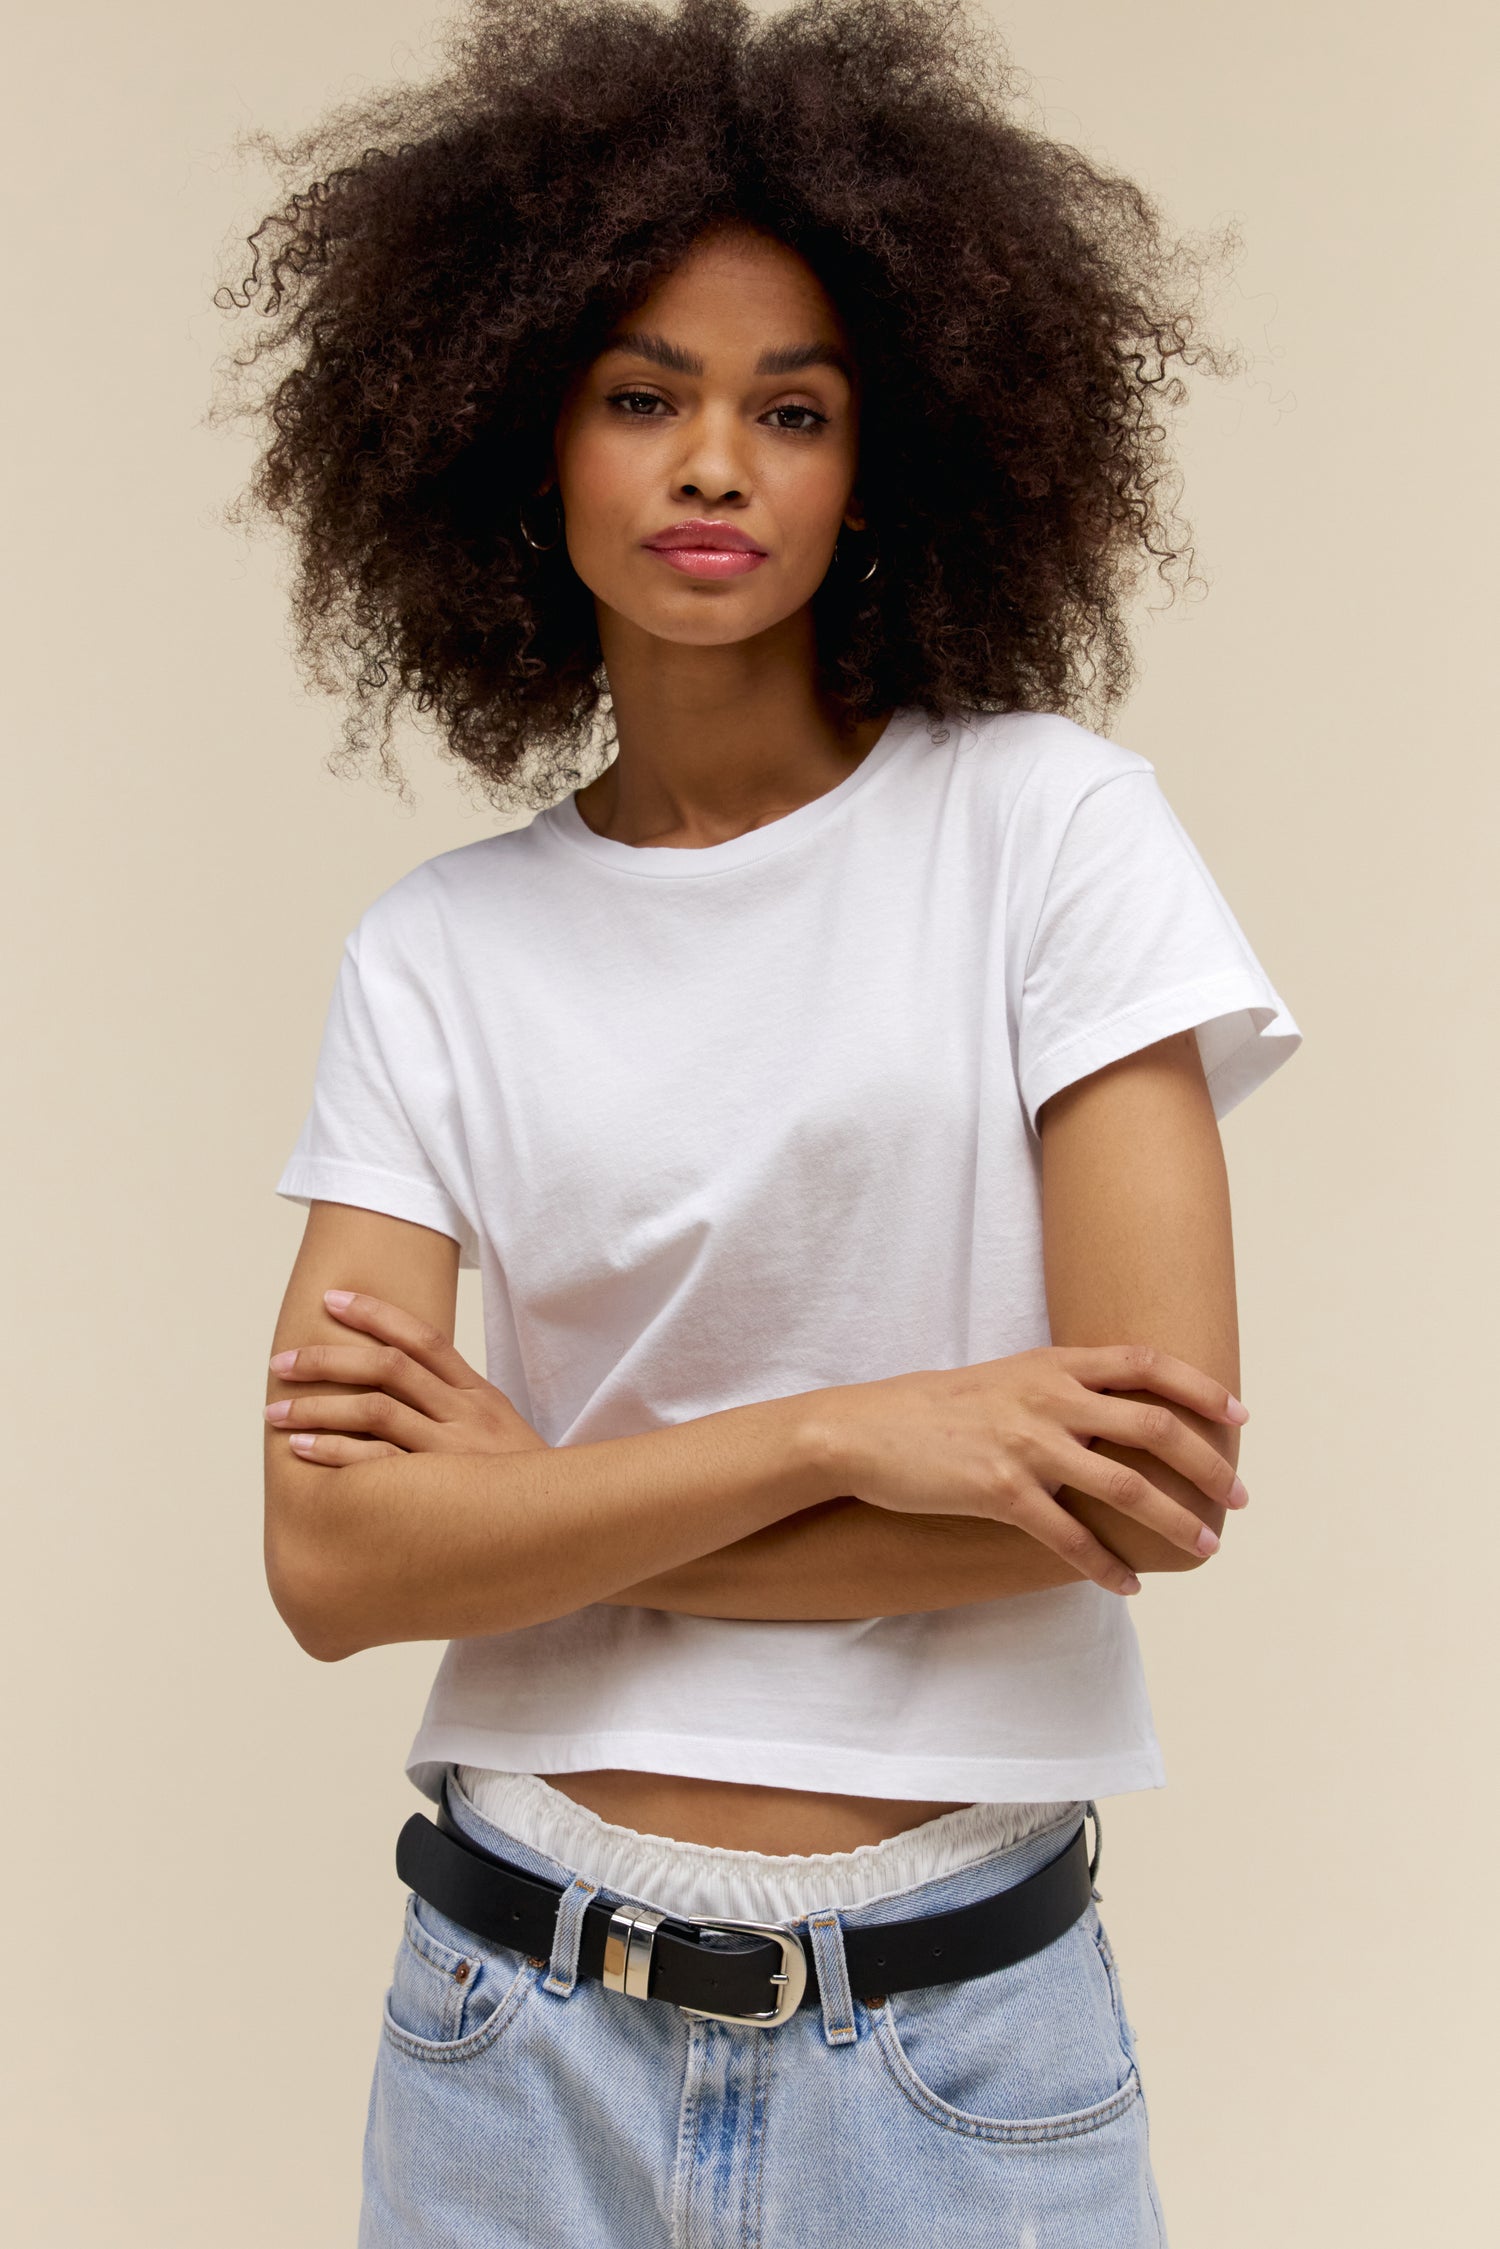 How To Pull Off A Crop Top? – solowomen